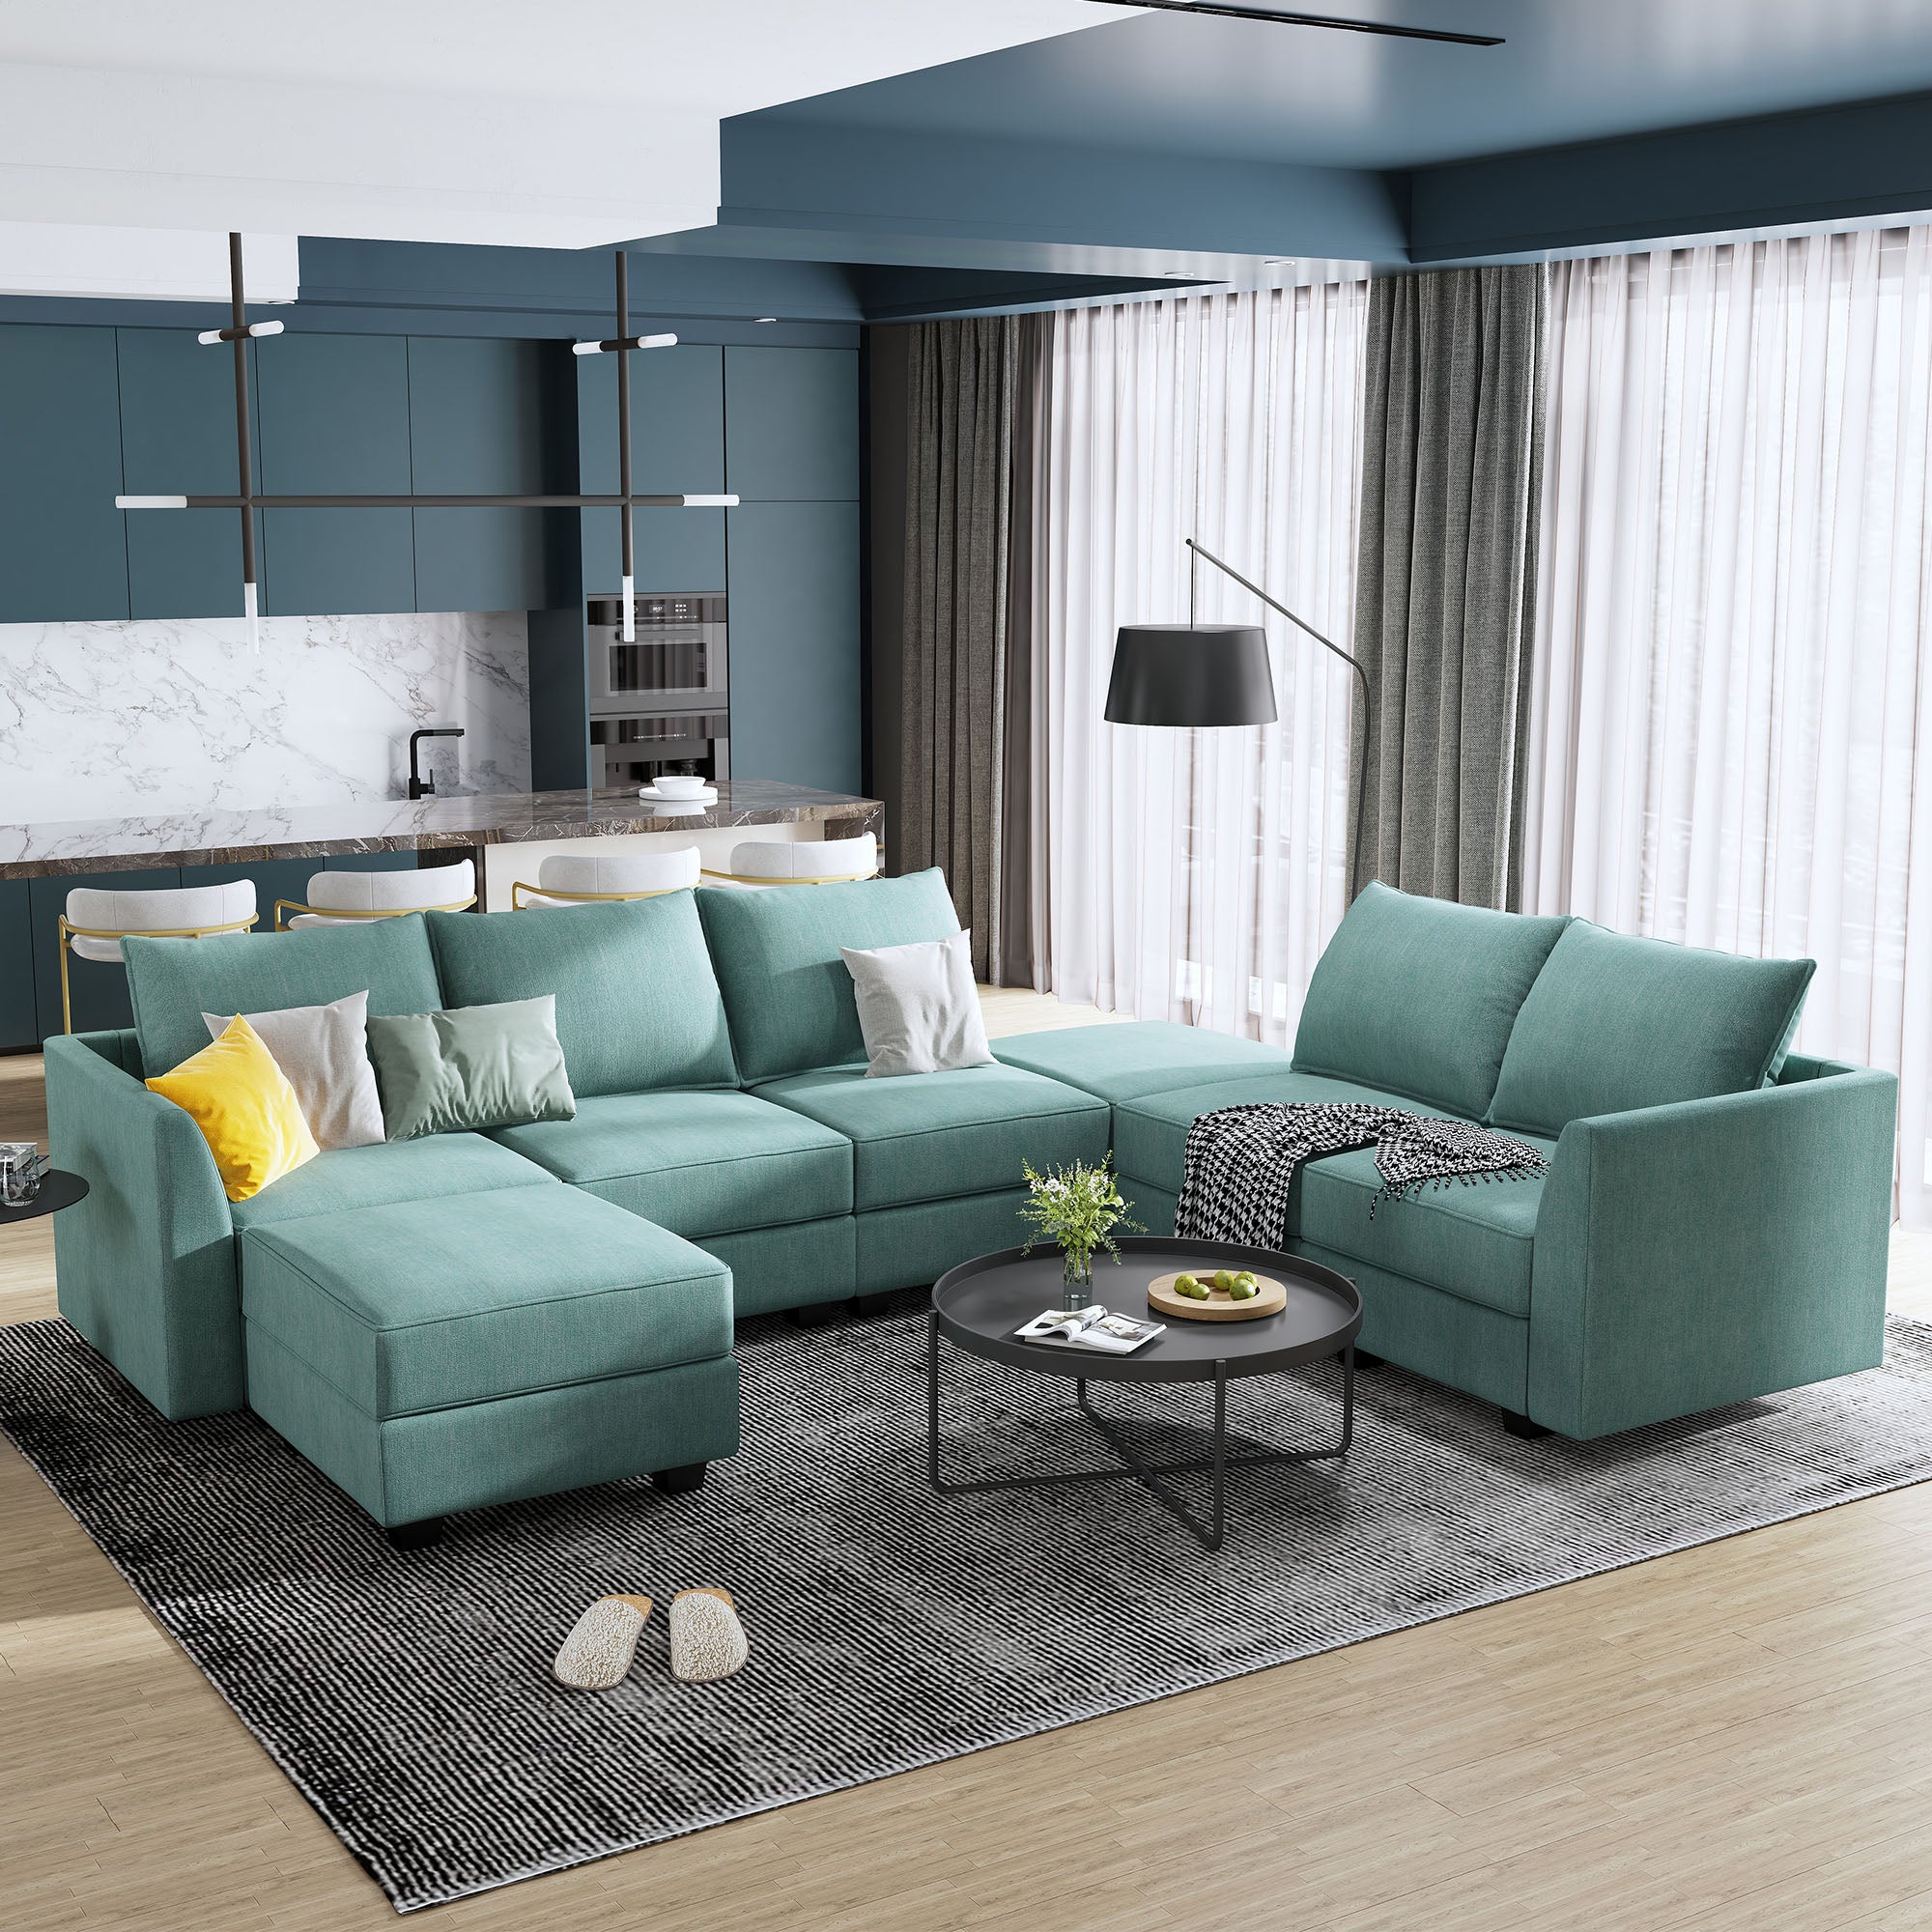 HONBAY Aqua Blue Convertible Modular Sectional Couch with Storage Space